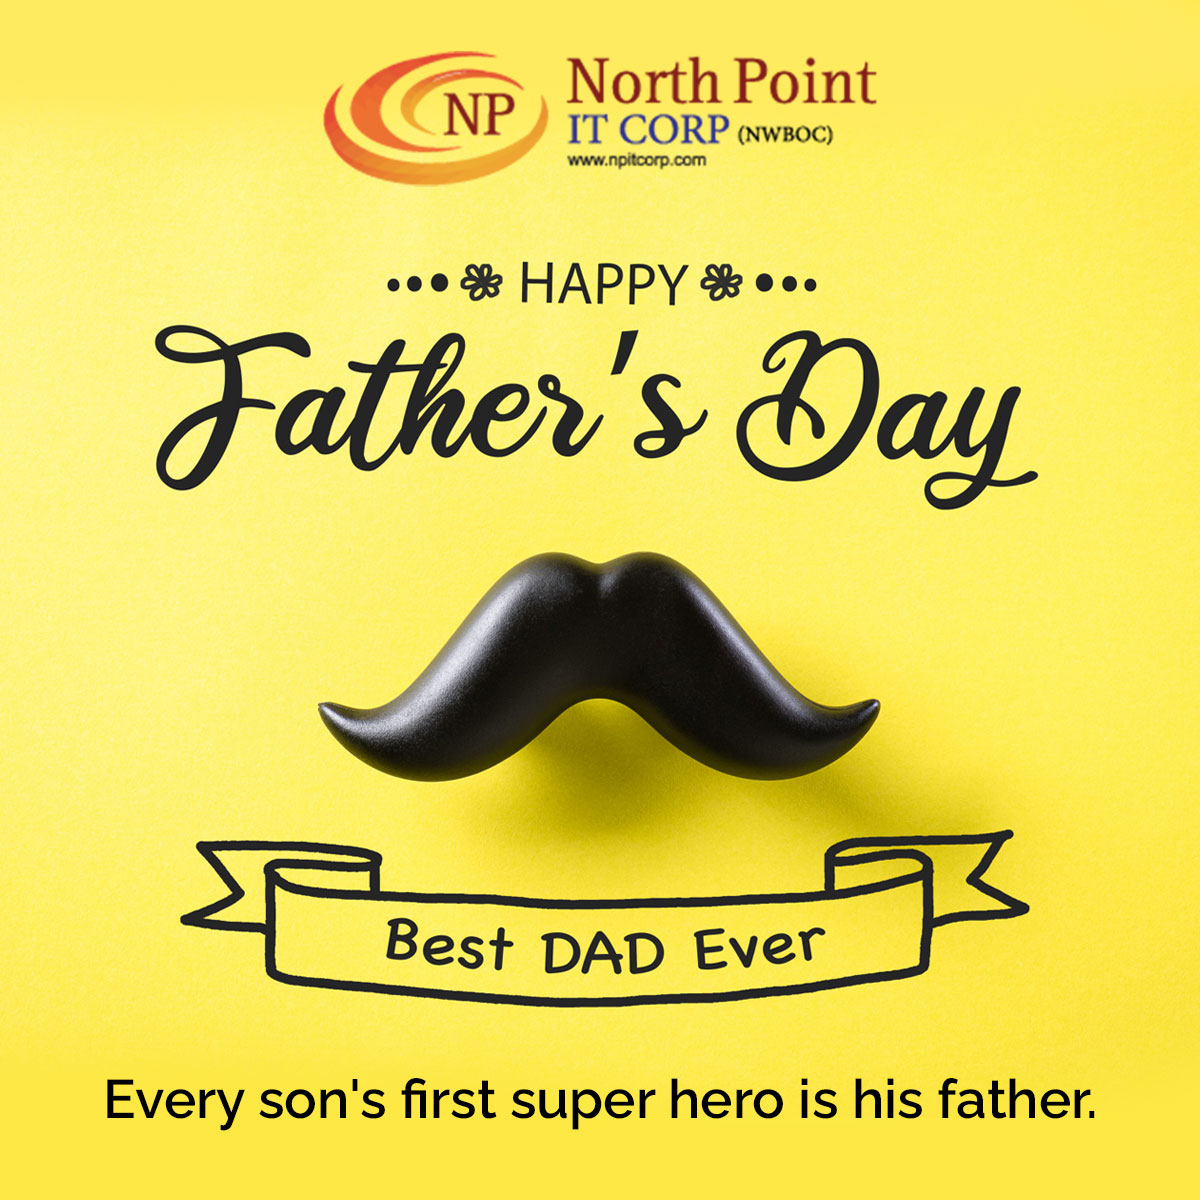 HAPPY FATHER'S DAY!!!
Every son's first superhero is his father.

#NorthPoint #hrconsultant #newjobs #creativity #training #motivation #leadership #success  #itprojects #opportunities #company #company #fathersday #happyfathersday #fatherandson #bond #family #sonshero